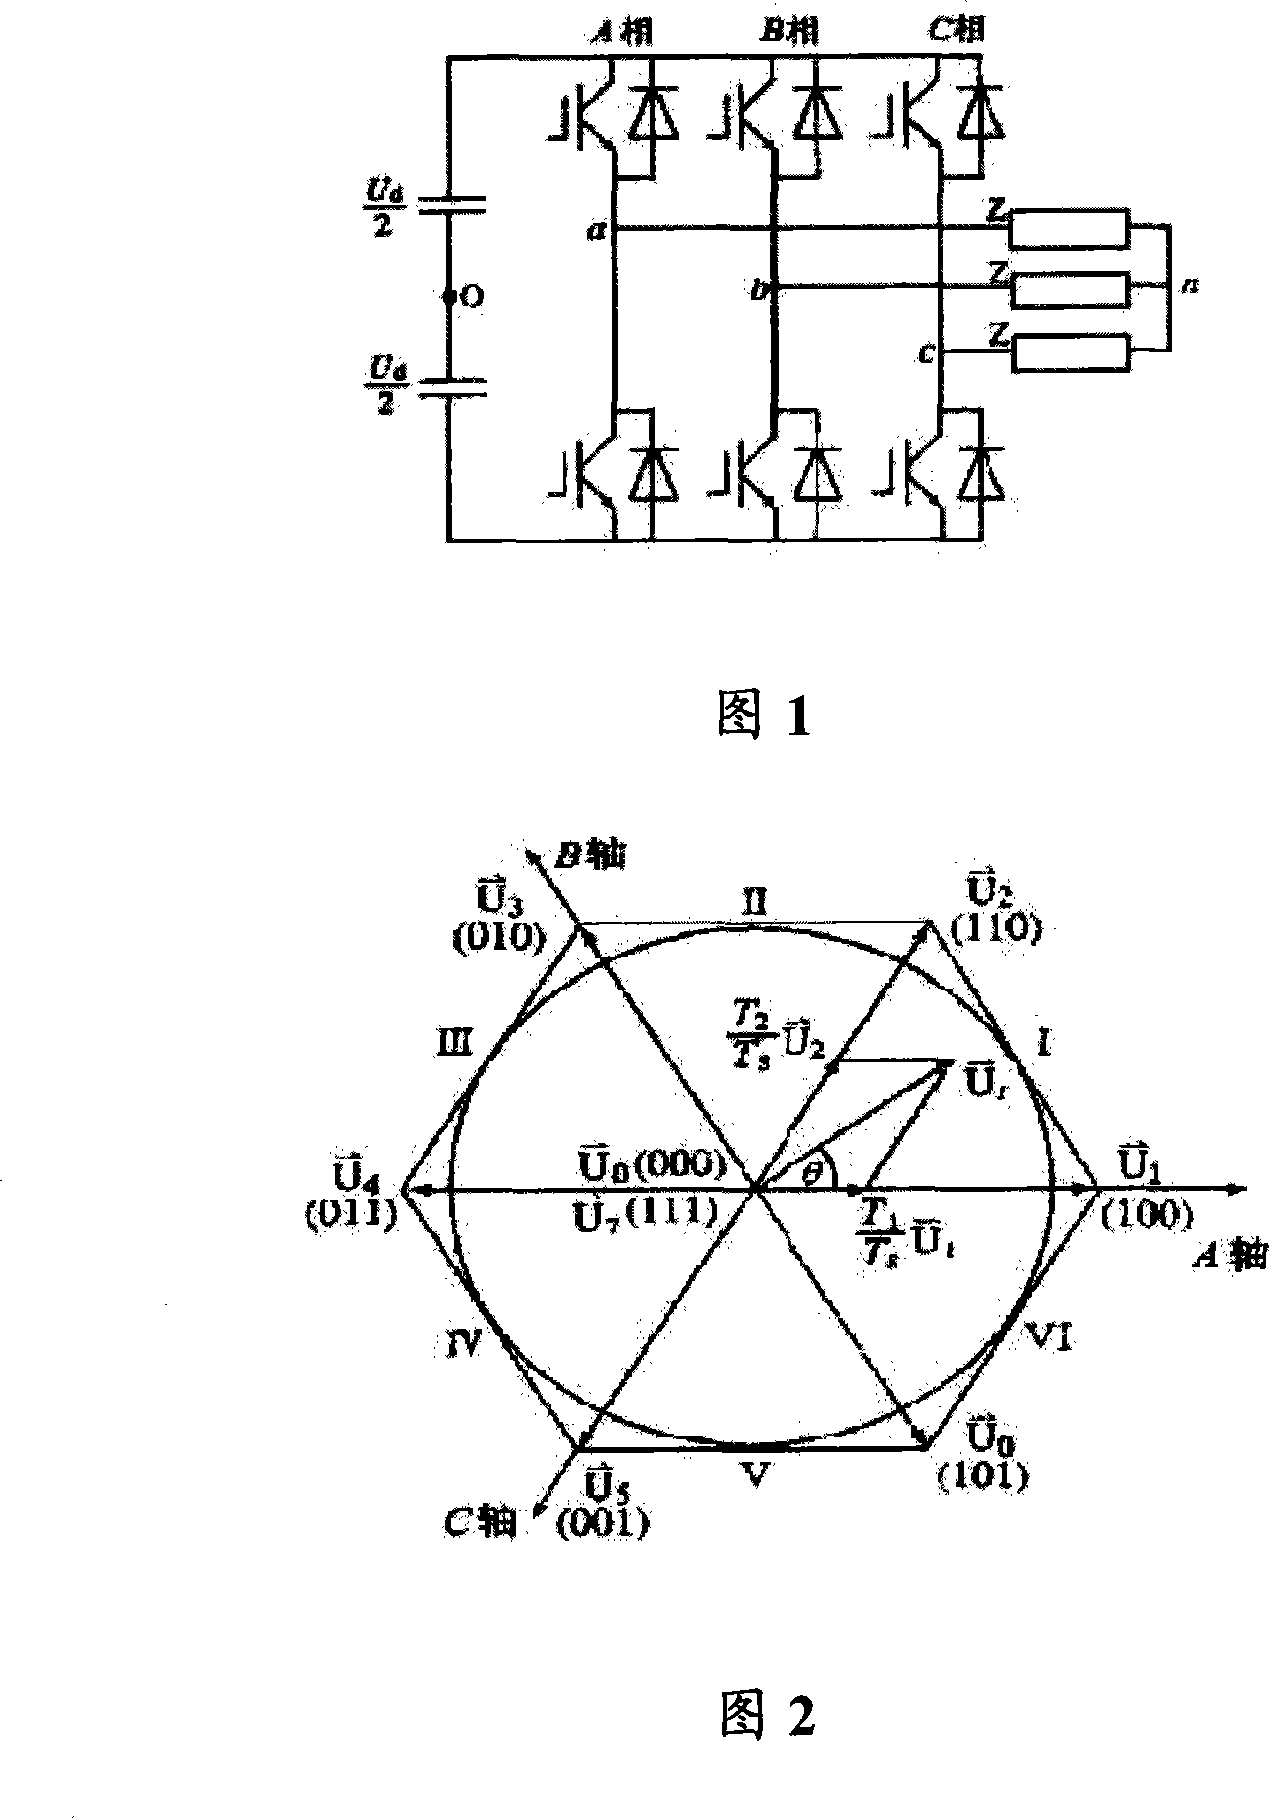 Electric motor control method and device adopting space vector pulse width modulation